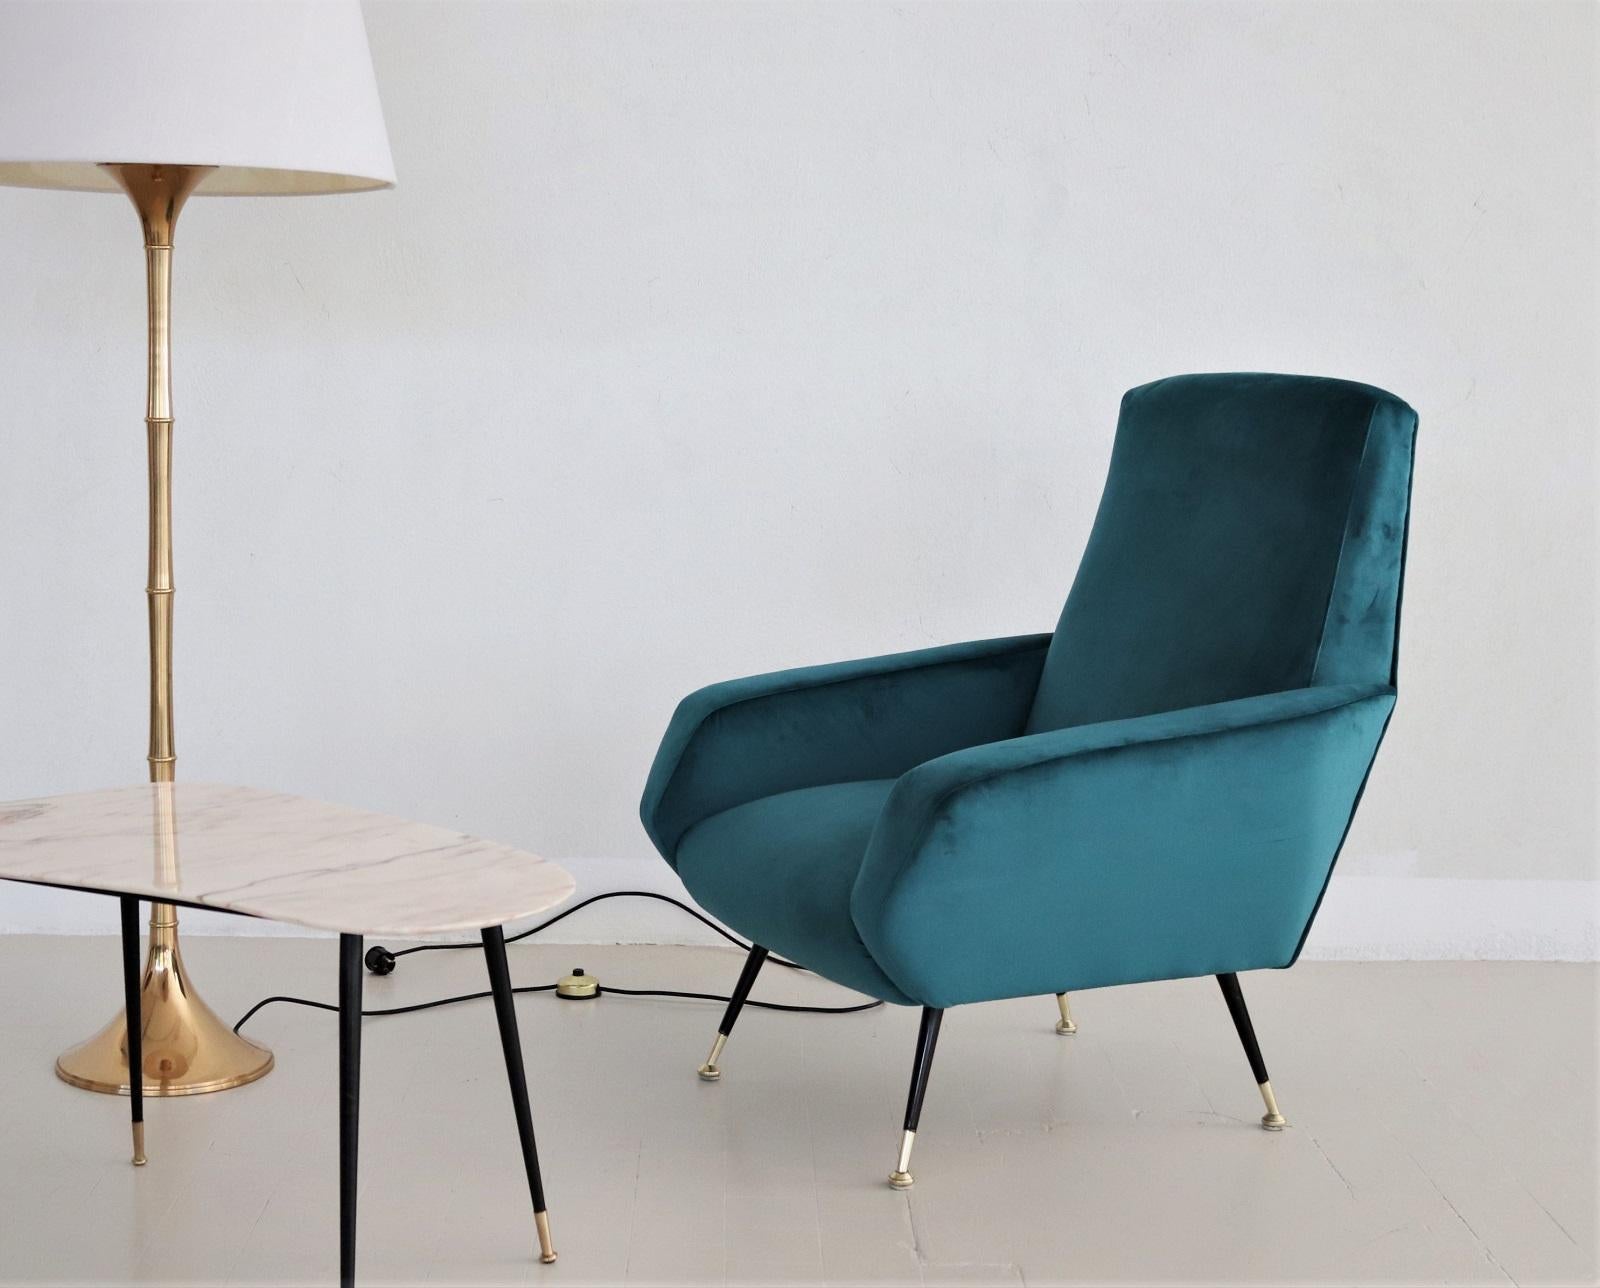 Beautiful and elegant Italian vintage armchair, original from the 1950s.
The armchair have been restored completely internally with high quality material and reupholstered with petrol - blue colored soft velvet fabric.
Legs are made of solid black